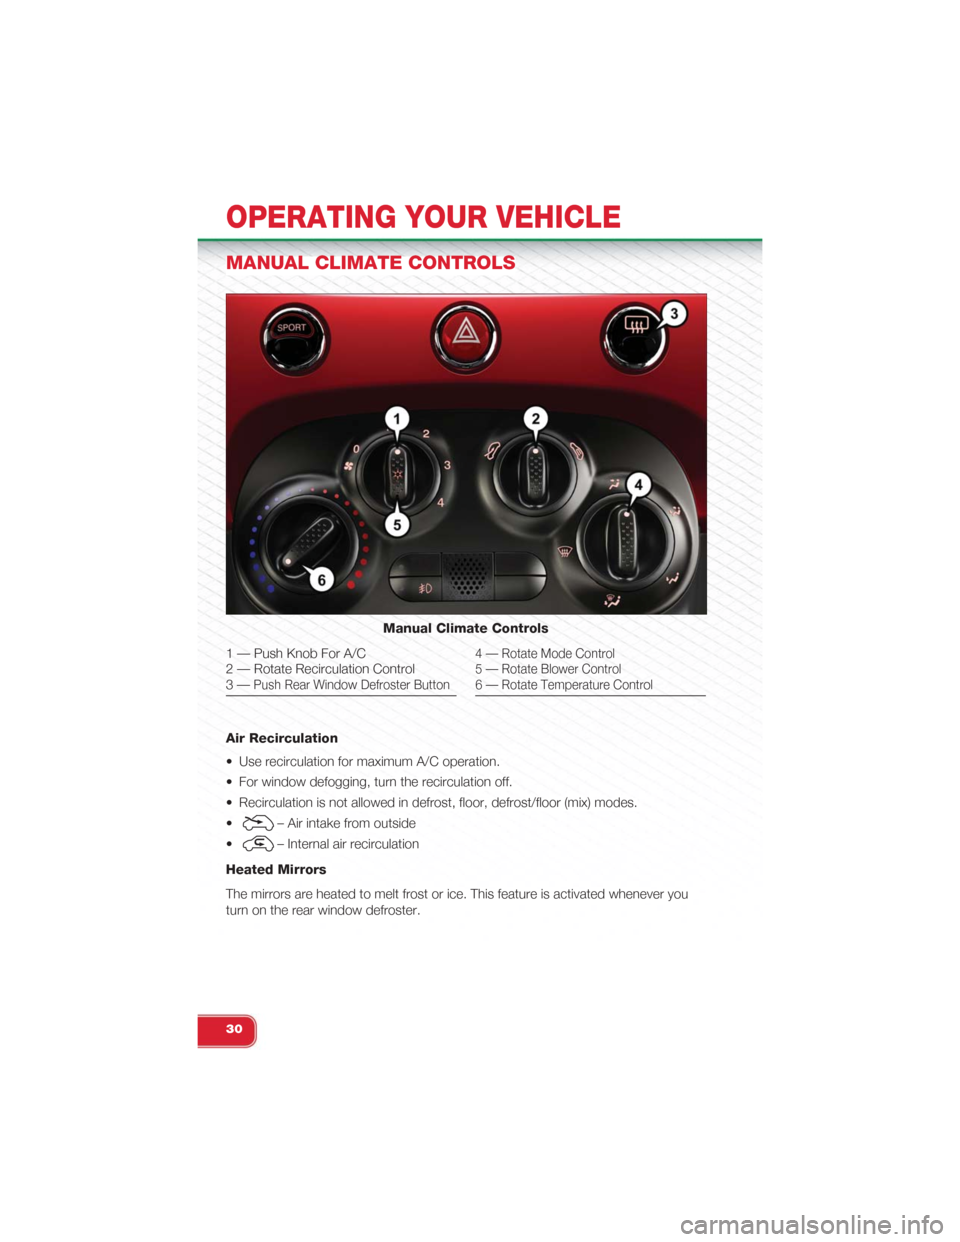 FIAT 500 ABARTH 2015 2.G Owners Guide MANUAL CLIMATE CONTROLS
Air Recirculation
• Use recirculation for maximum A/C operation.
• For window defogging, turn the recirculation off.
• Recirculation is not allowed in defrost, floor, def